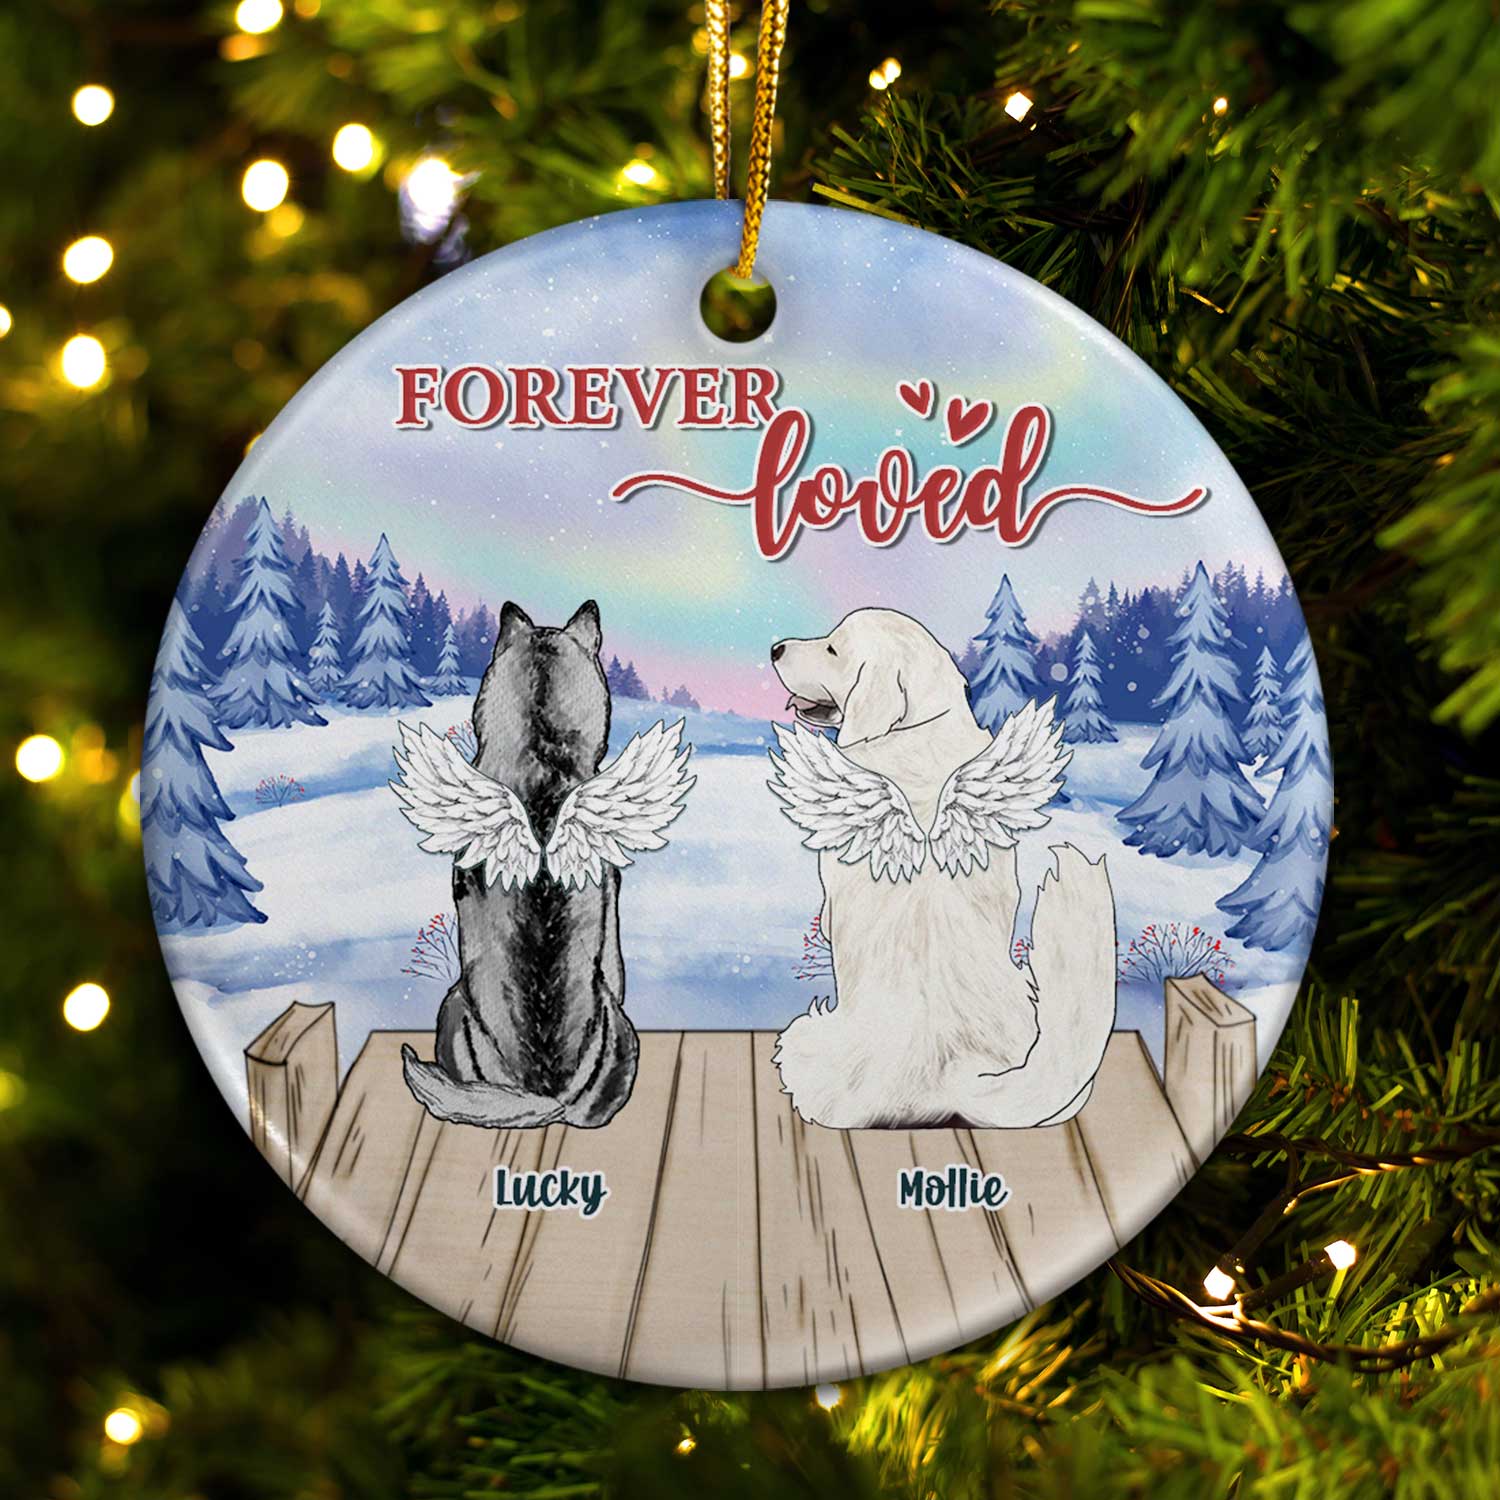 Forever Loved - Christmas Keepsake, Memorial Gift For Dog Lovers - Personalized Circle Ceramic Ornament